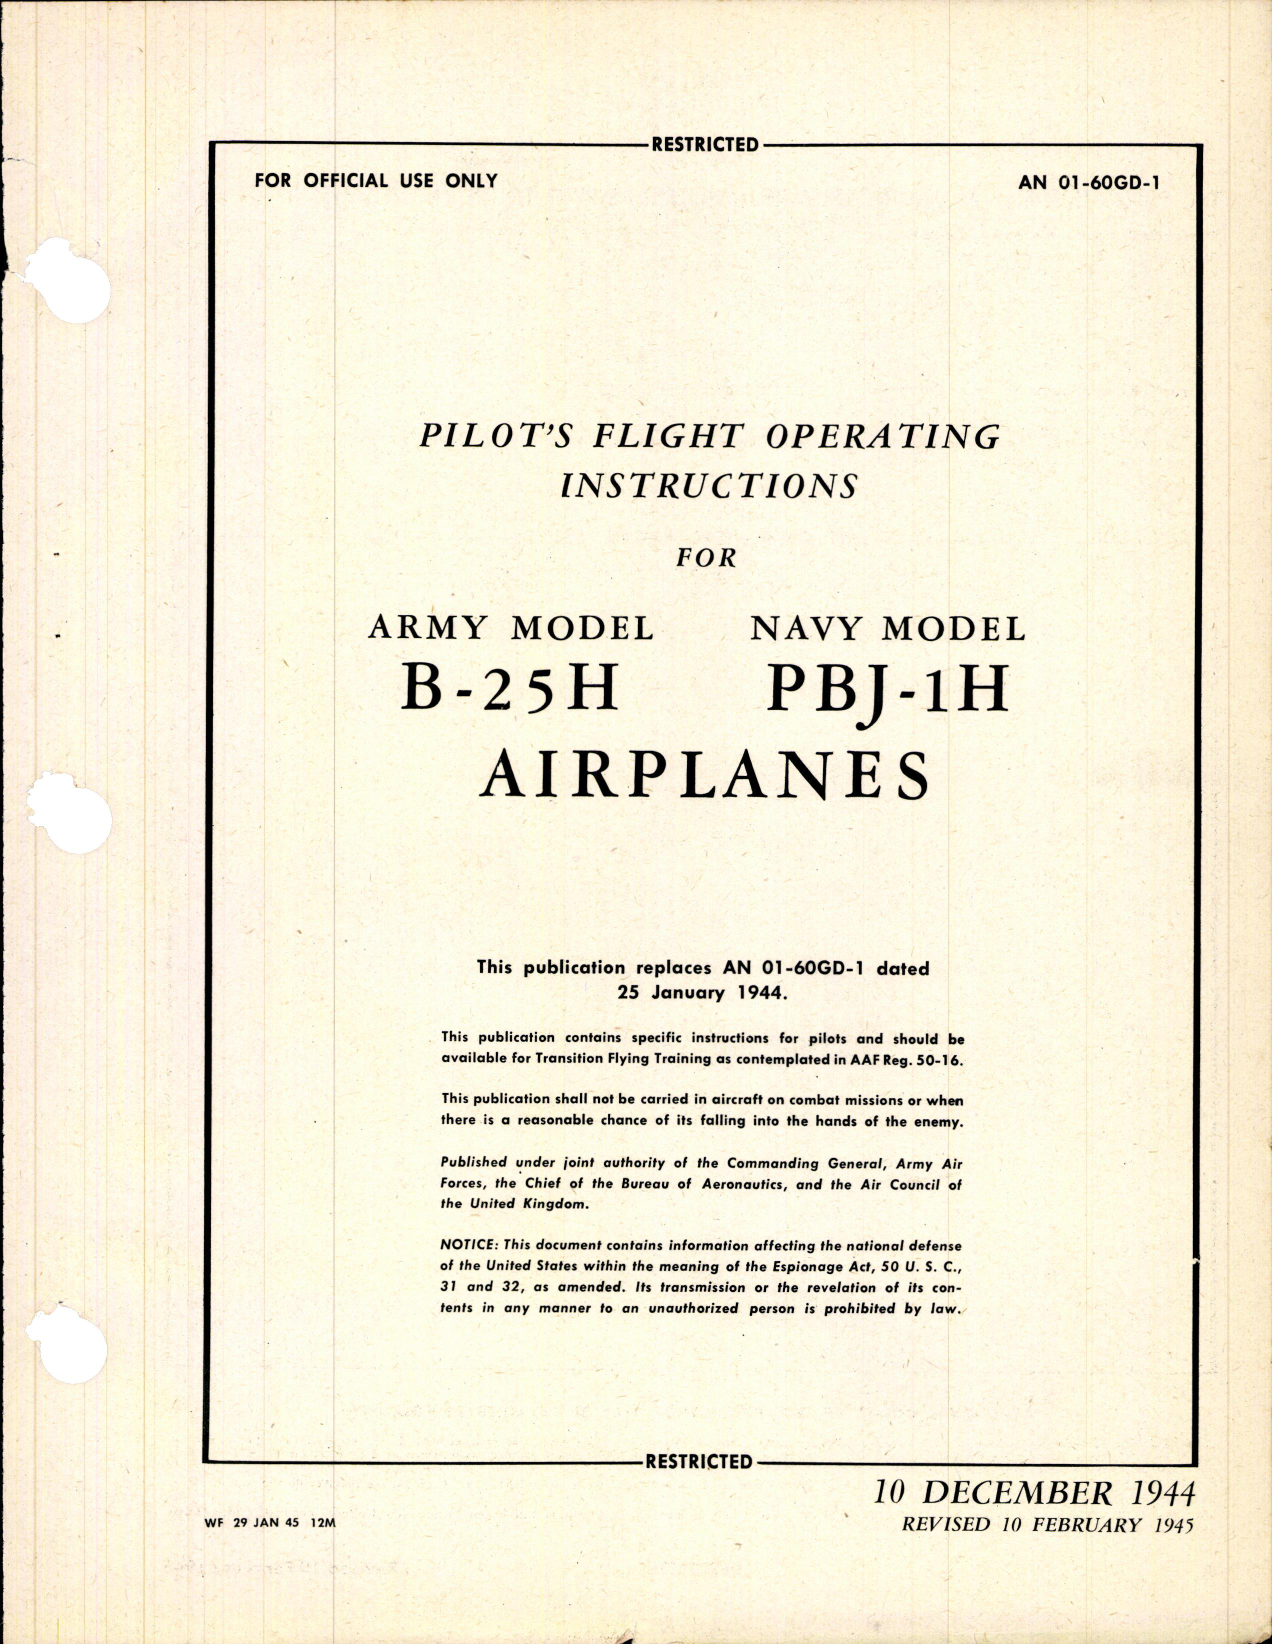 Sample page 3 from AirCorps Library document: Pilot's Flight Operating Instructions for B-25H and PBJ-1H